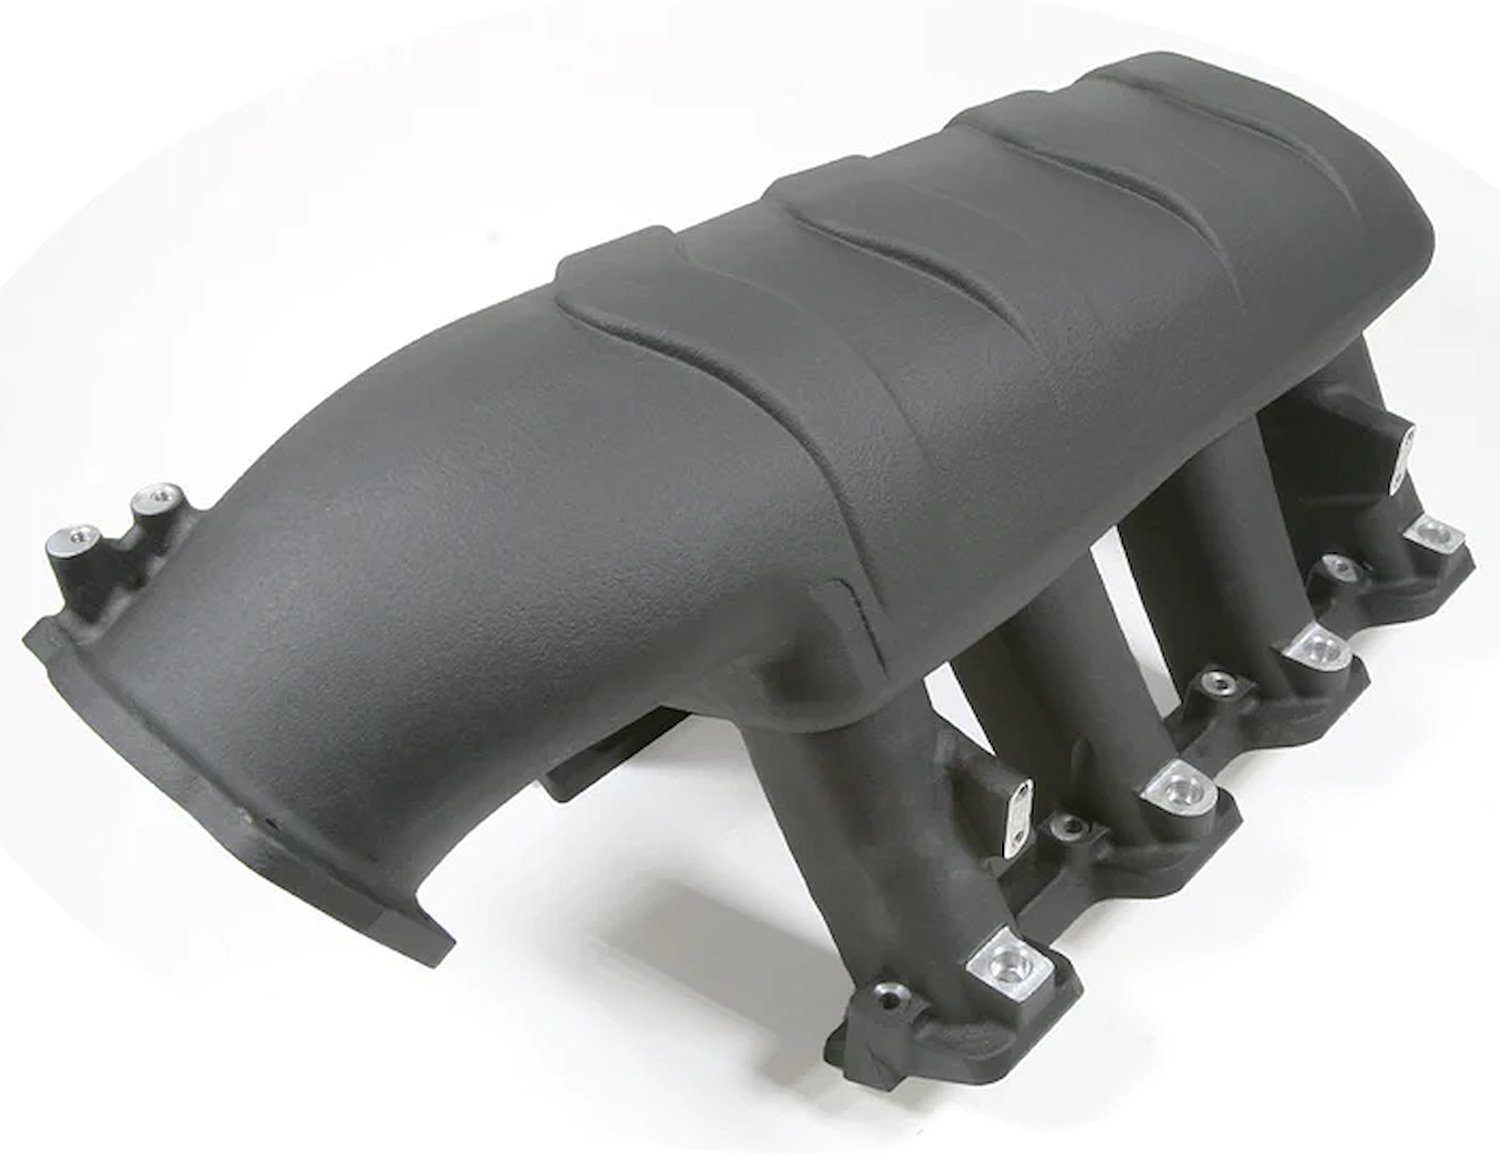 AM2012 Hi-Ram Intake Manifold, for GM LS3, Rectangle Port, with Fuel Rail Kit [Natural Finish]